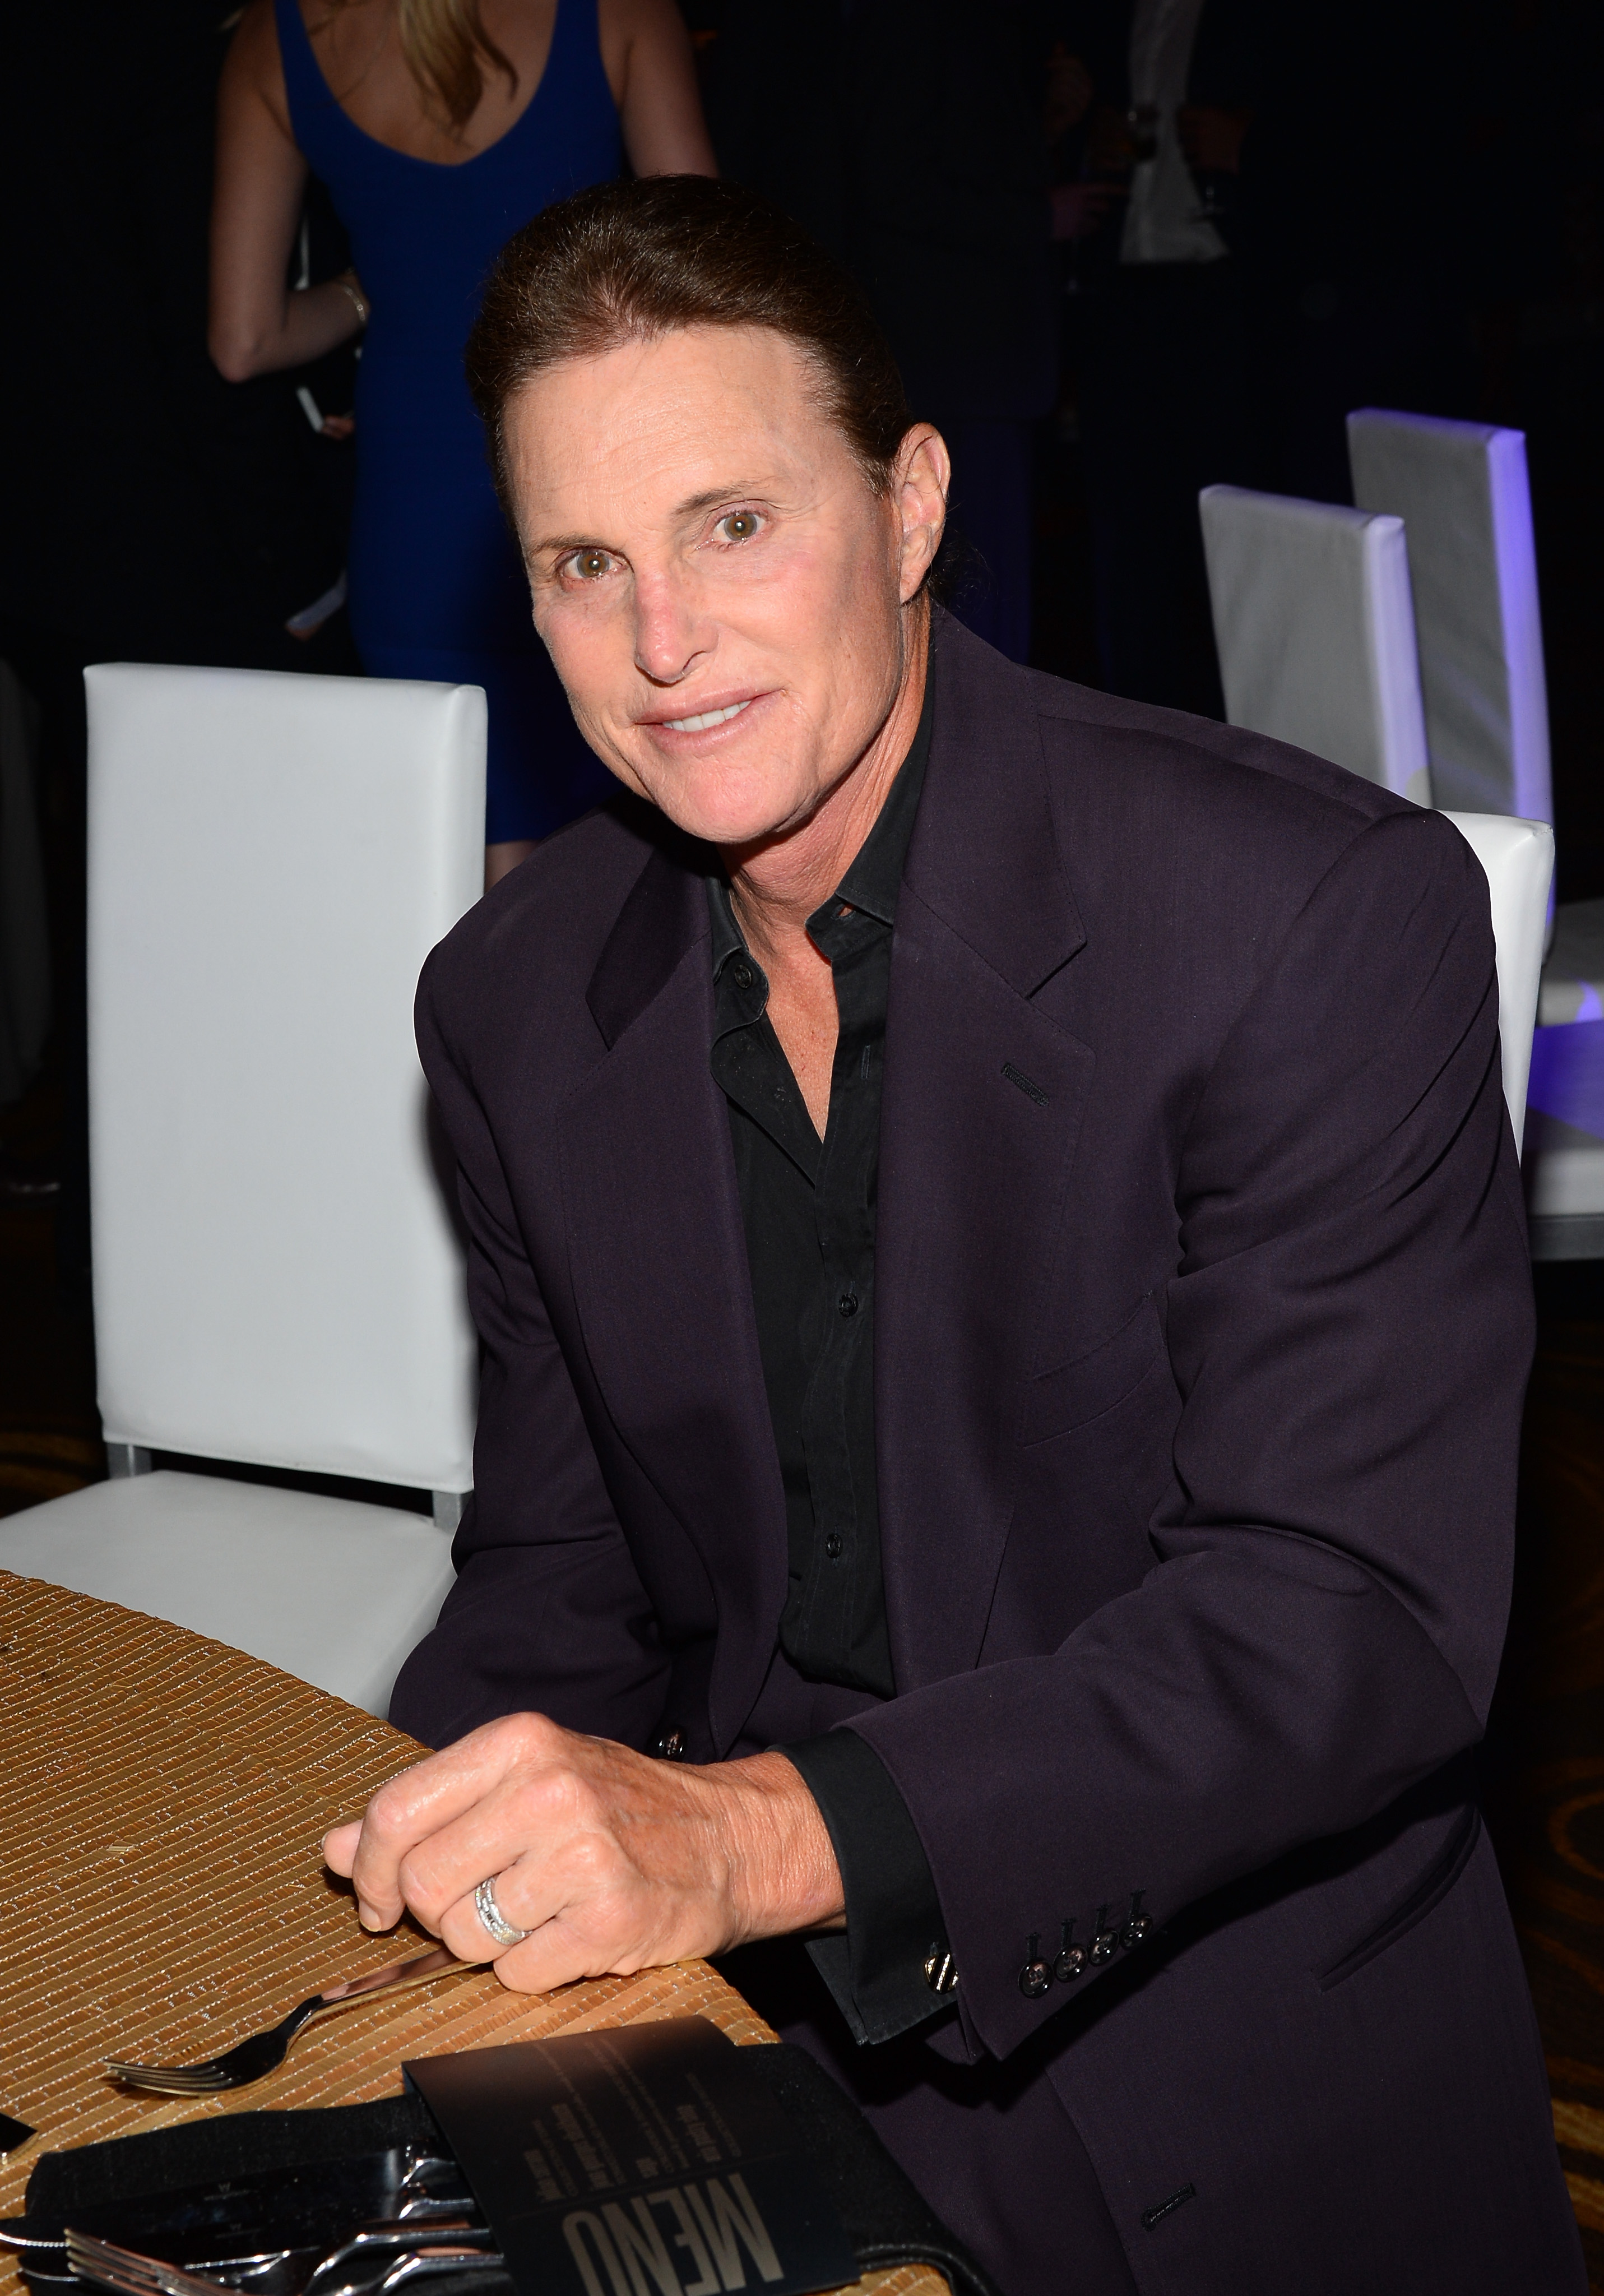 Television personality Bruce Jenner attends the 13th annual Michael Jordan Celebrity Invitational gala on April 4, 2014 in Las Vegas. (Ethan Miller—Getty Images)